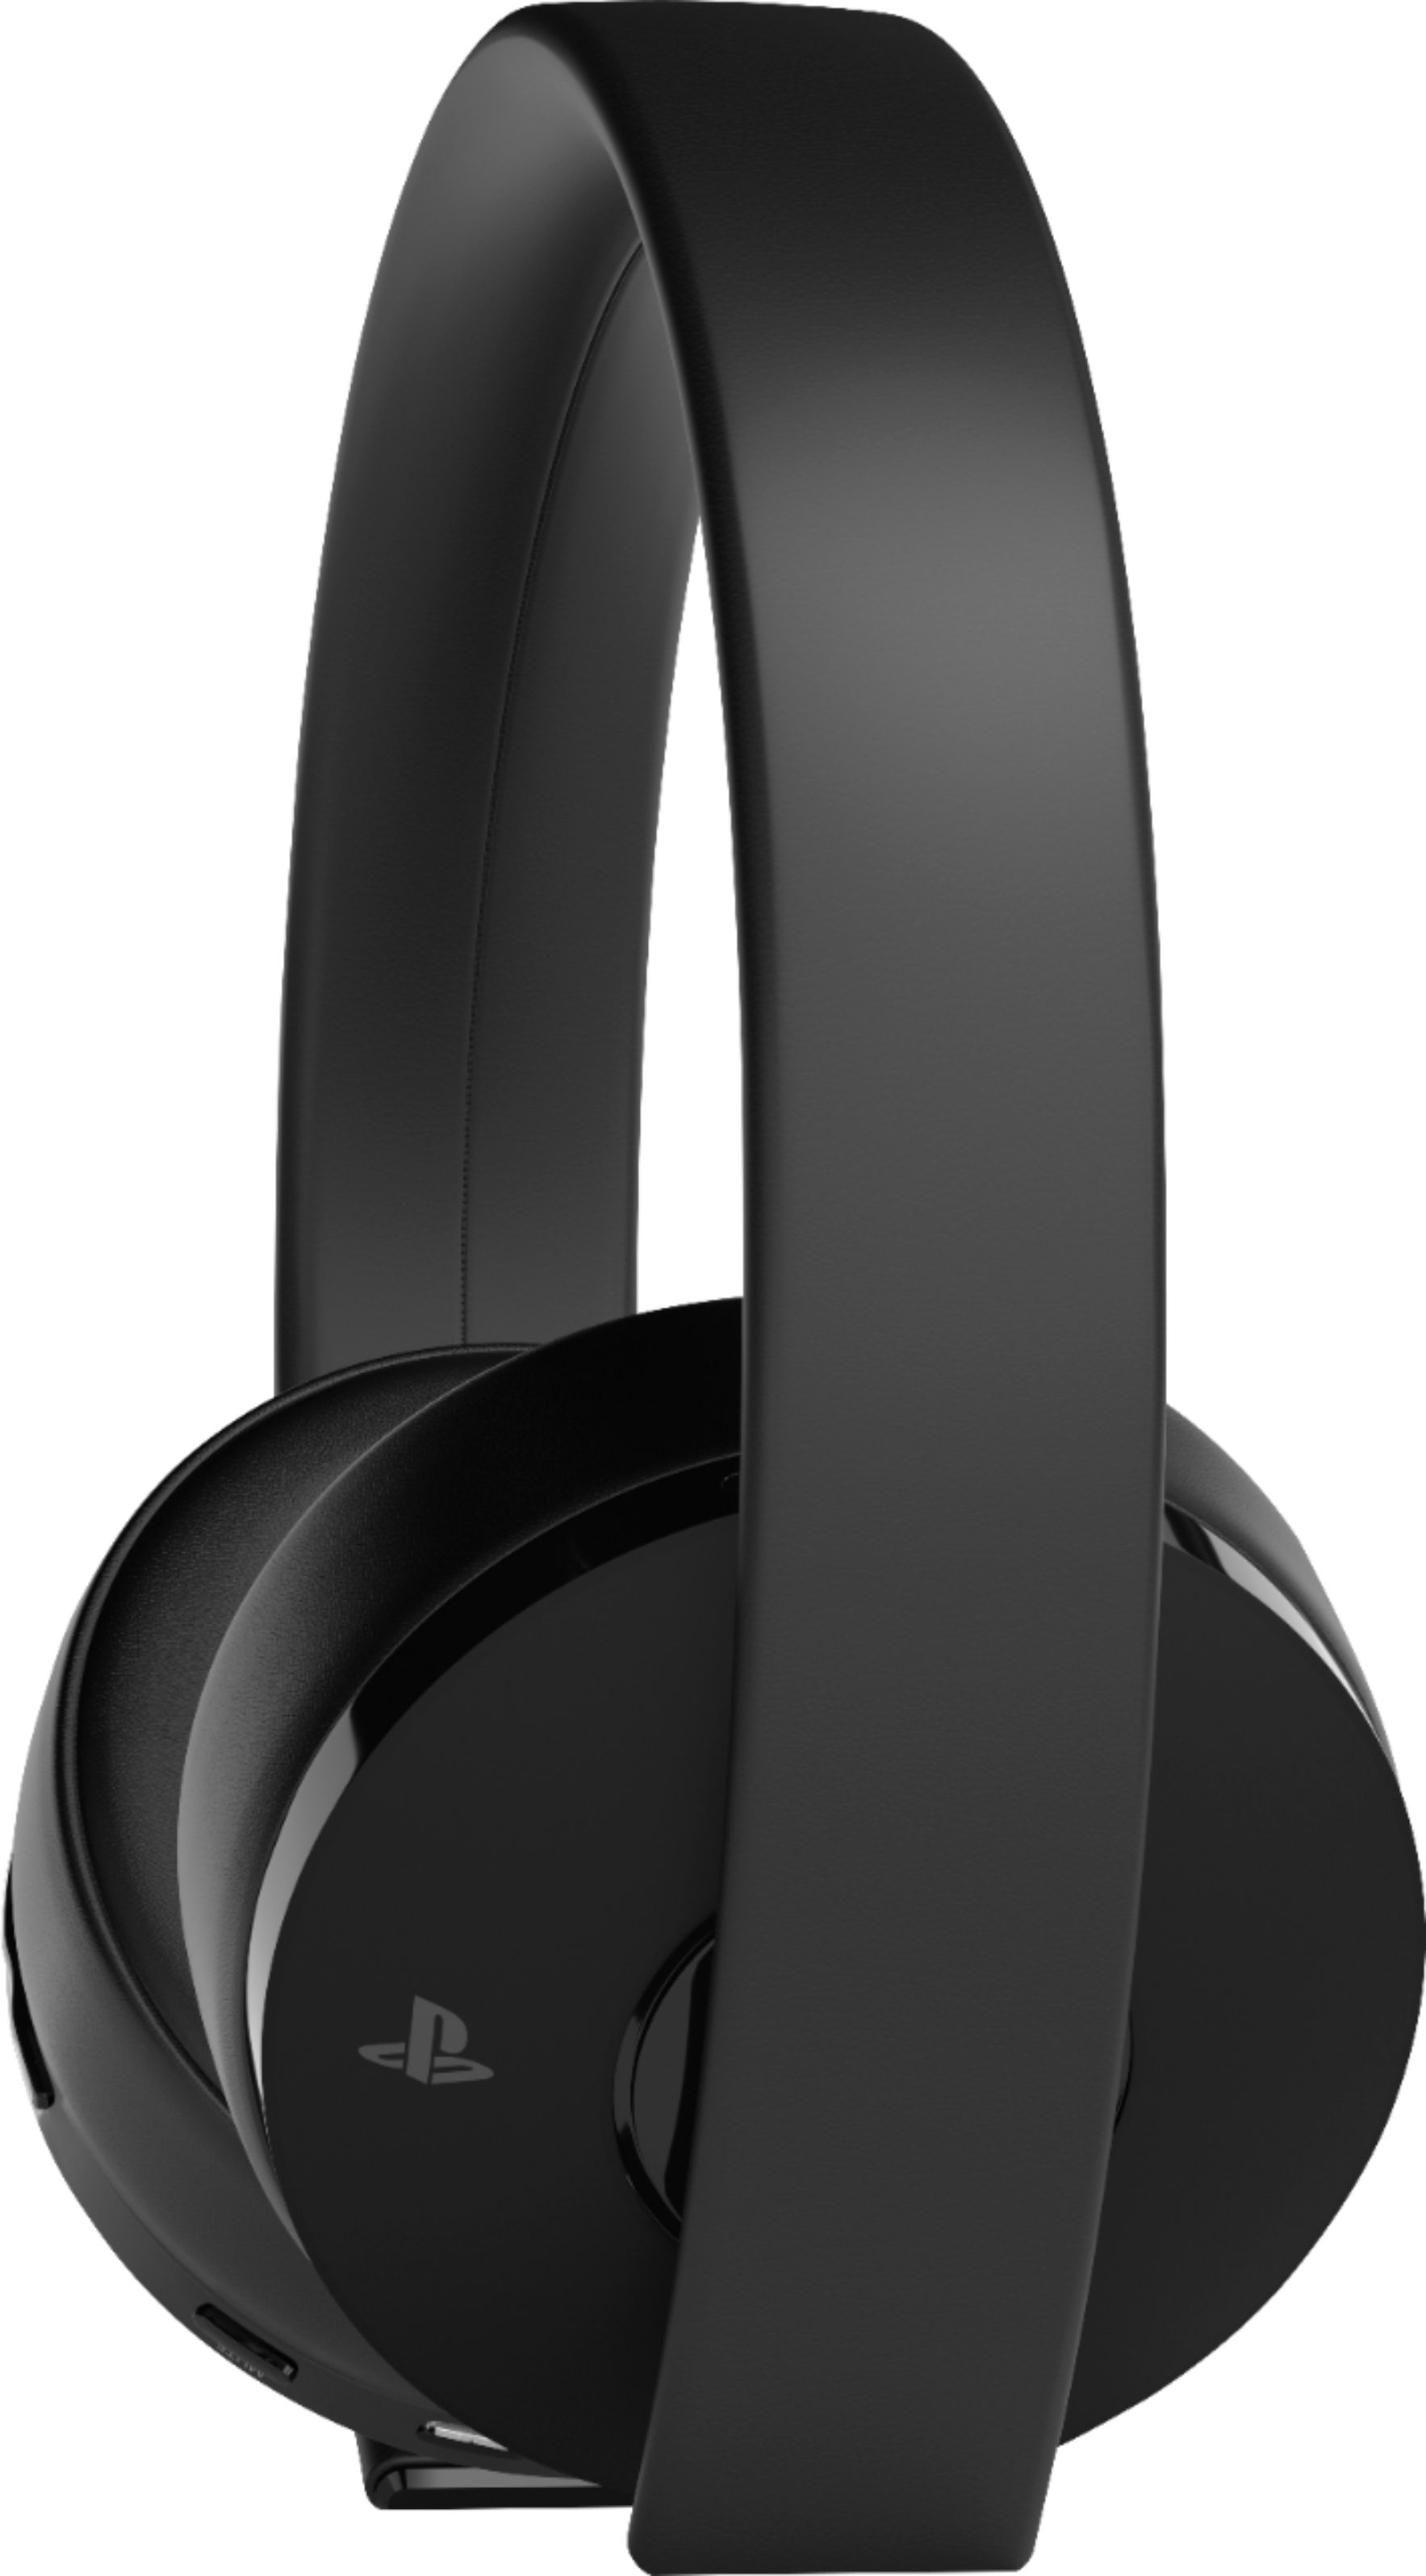 playstation gold wireless headset 2018